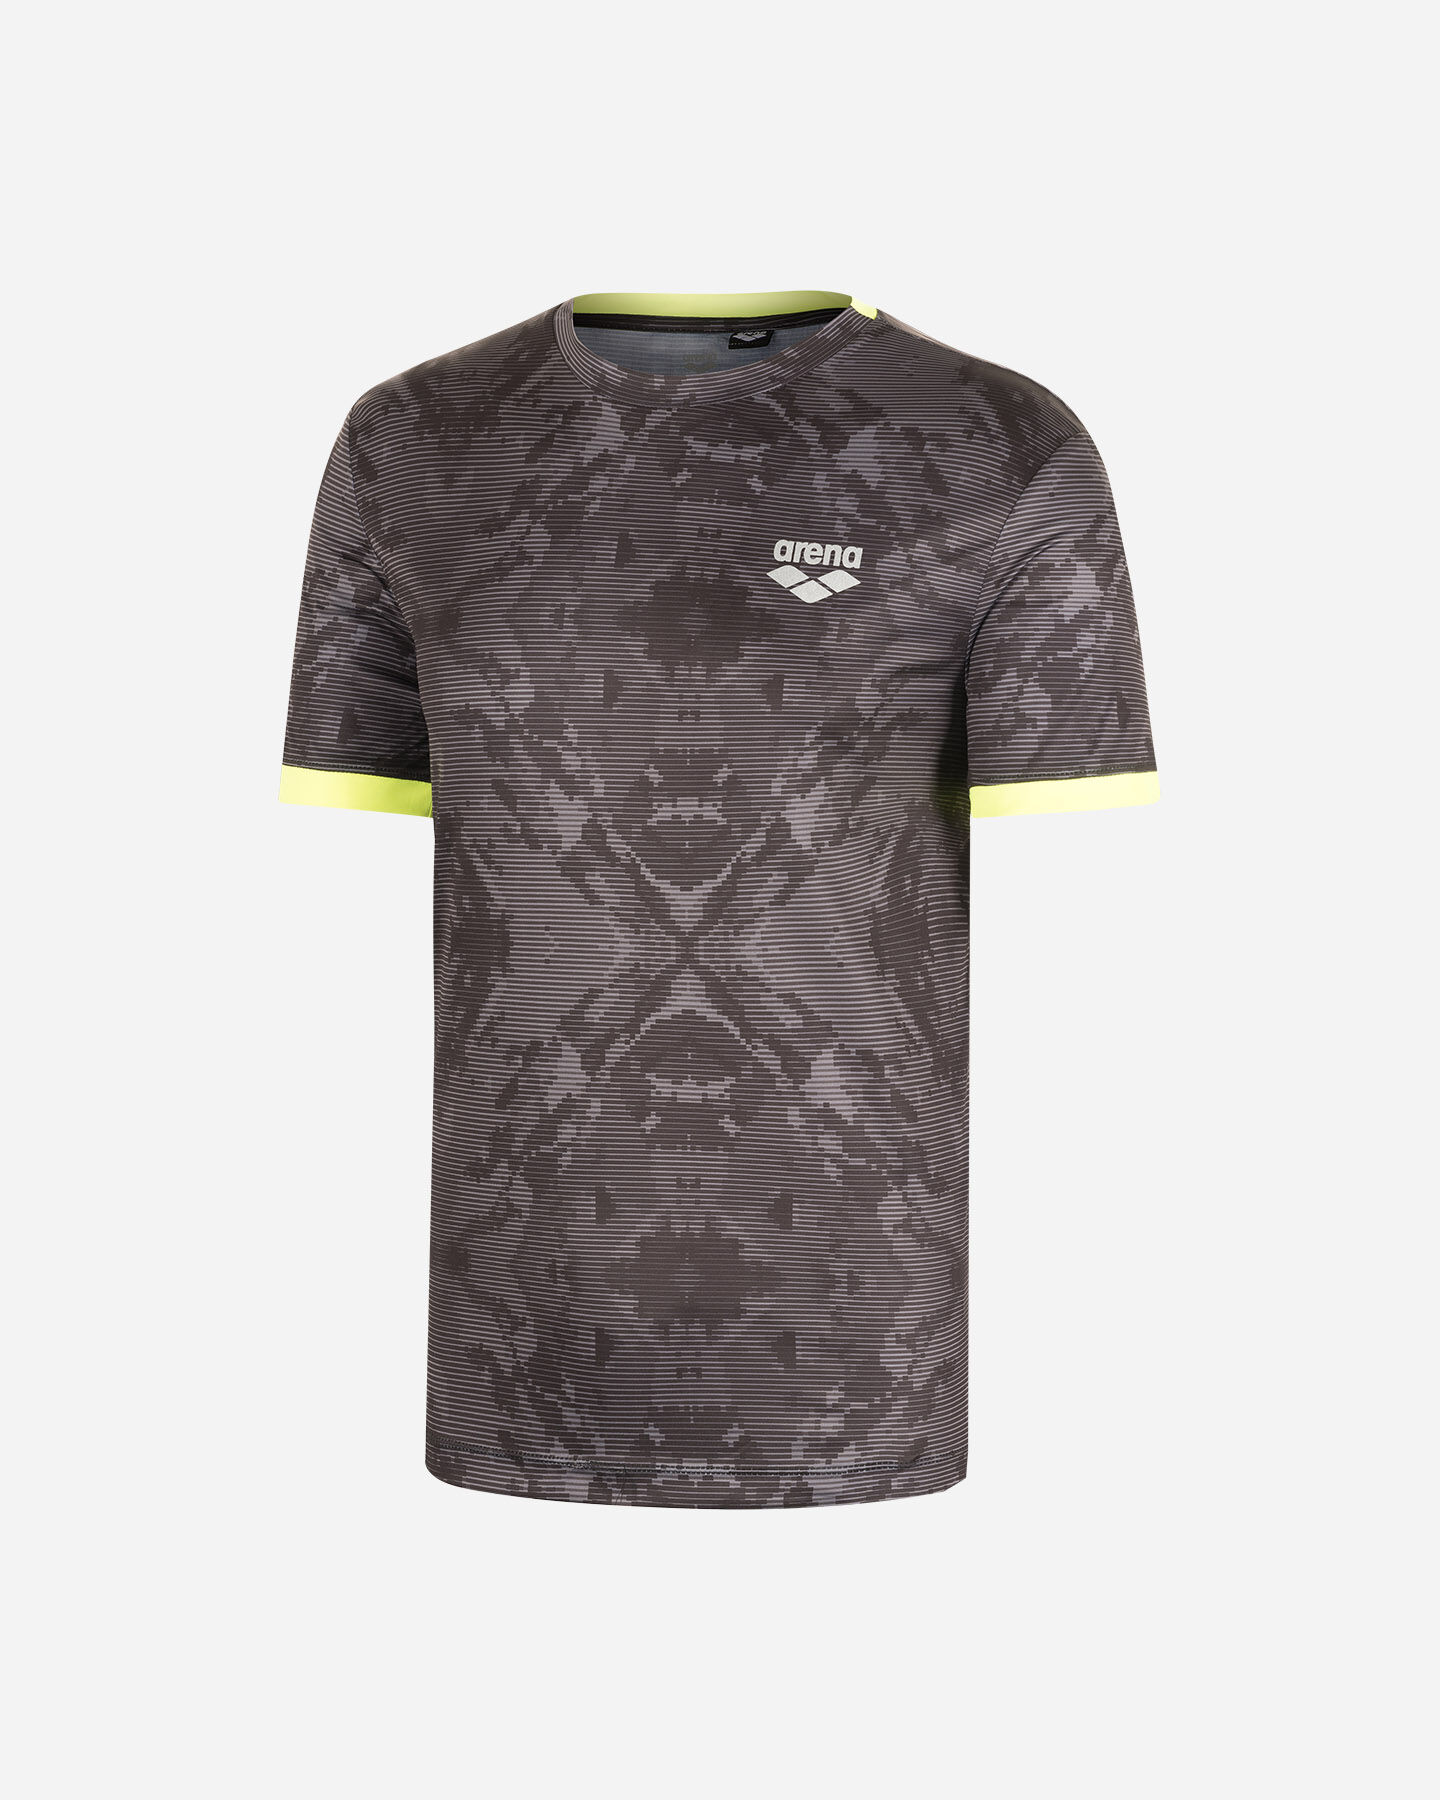  T-Shirt running ARENA AOP M S4087999|AOP|XS scatto 0